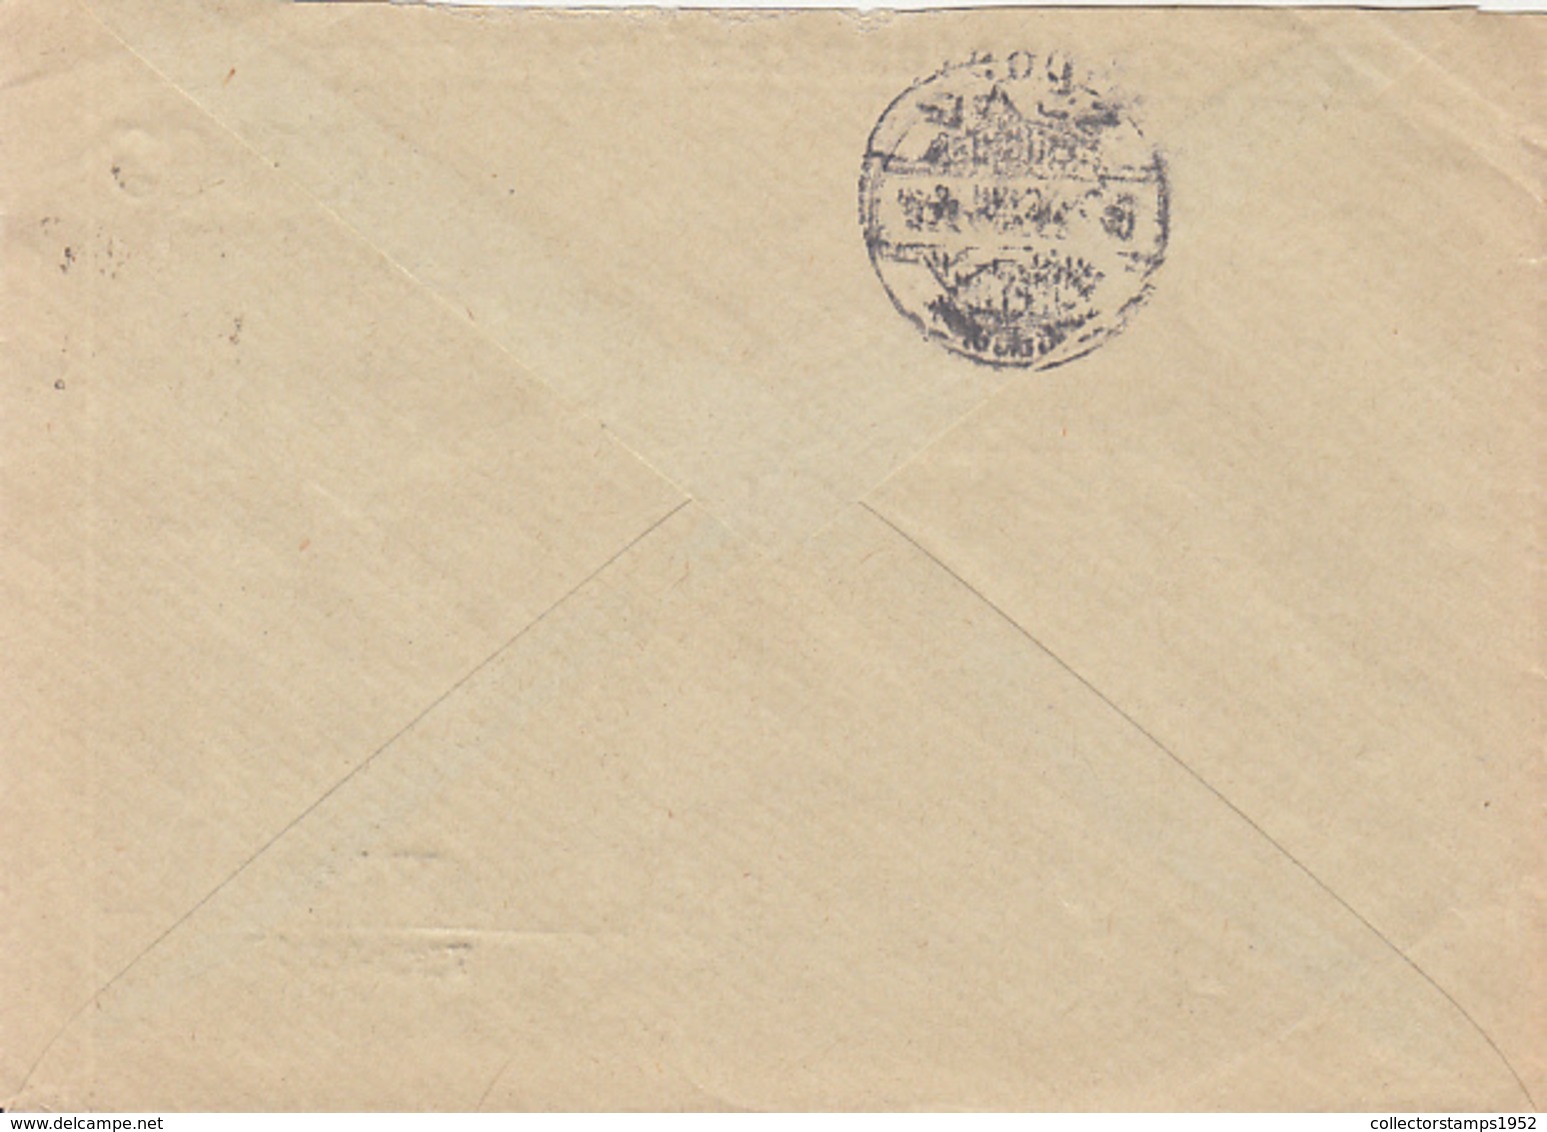 82636- AMOUNT 250 FILLERS OFFICIAL STAMPS ON ENTERPRISE HEADER COVER, 1926, HUNGARY - Service